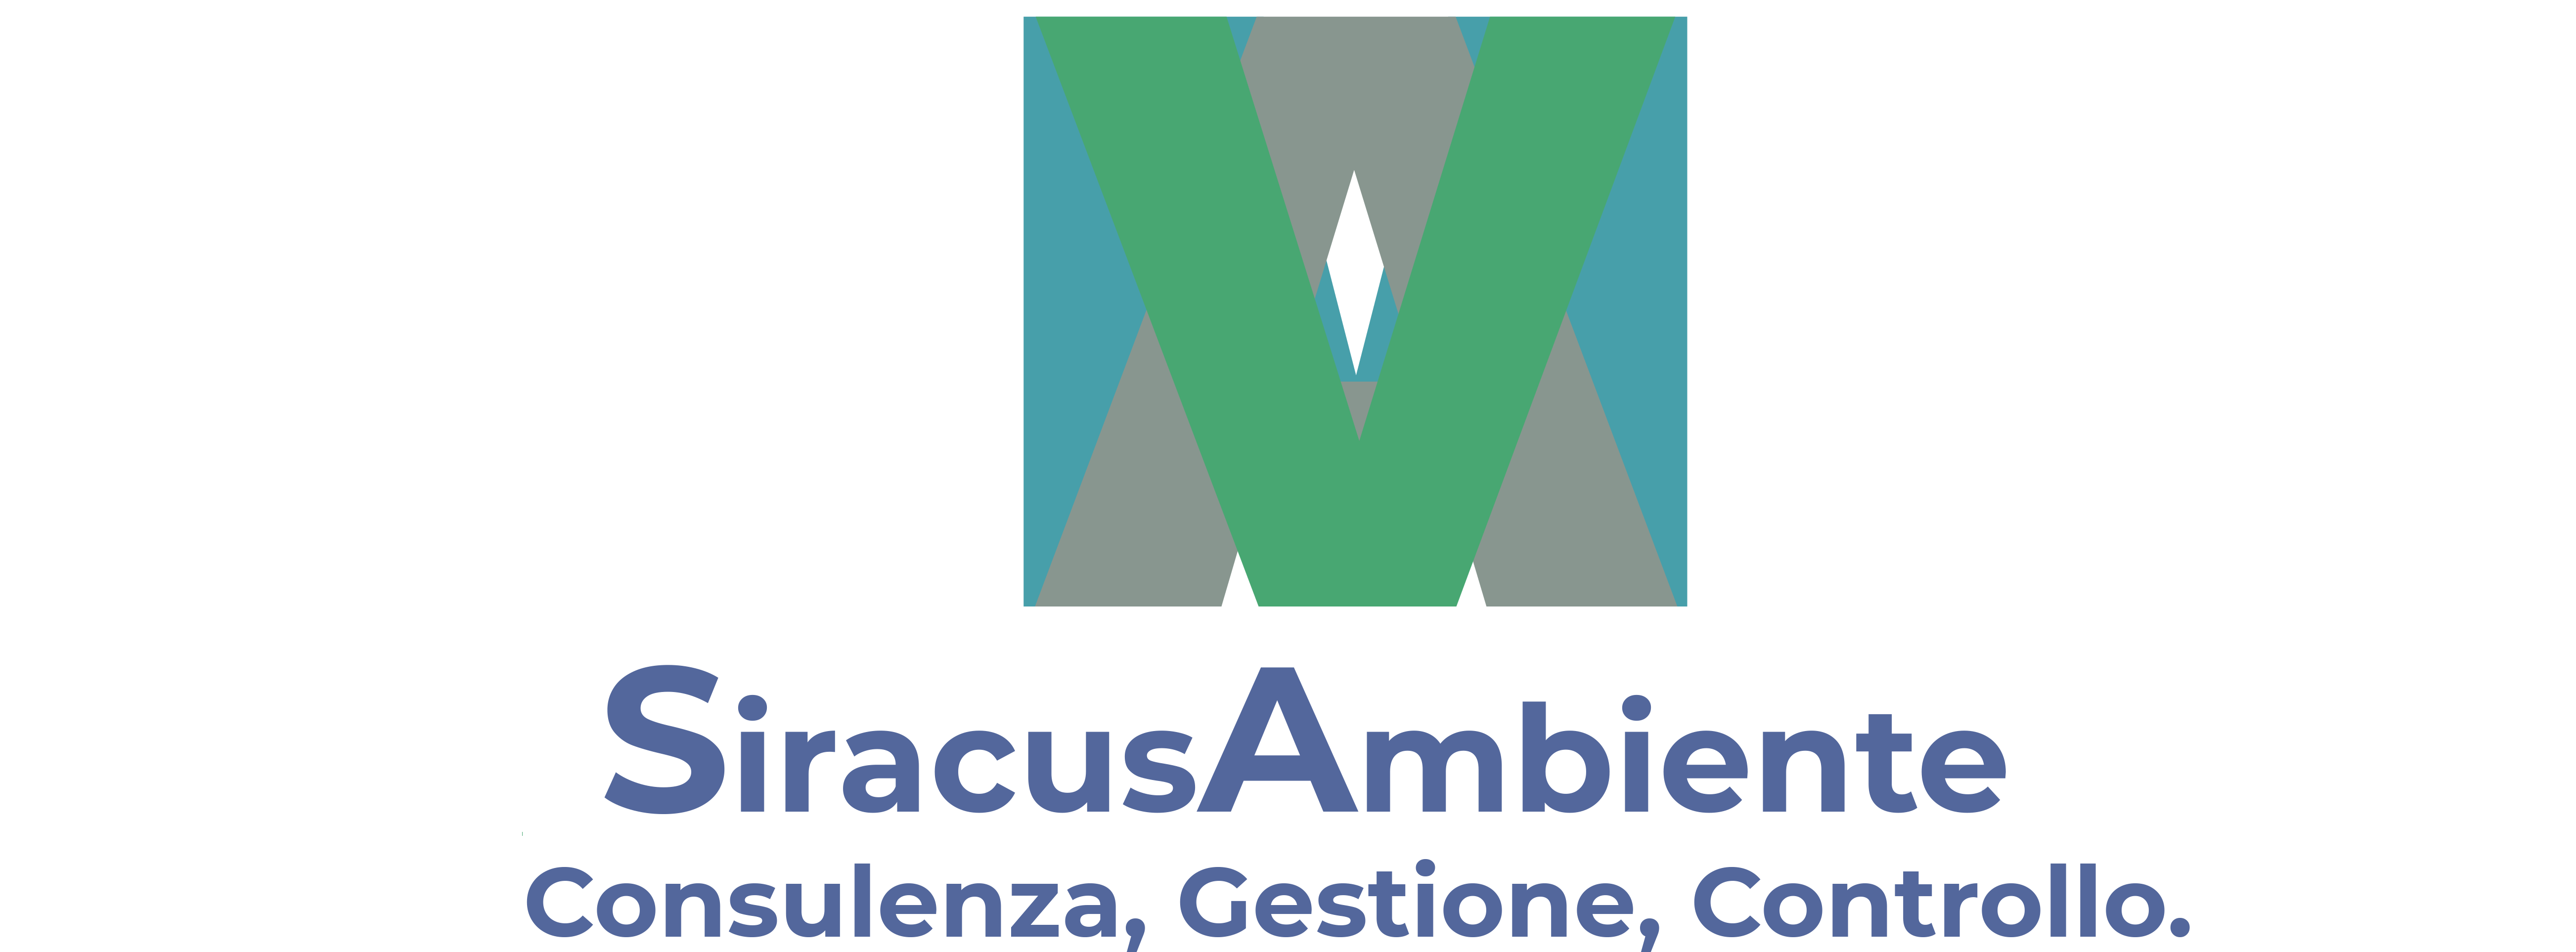 Siracusa Ambiente